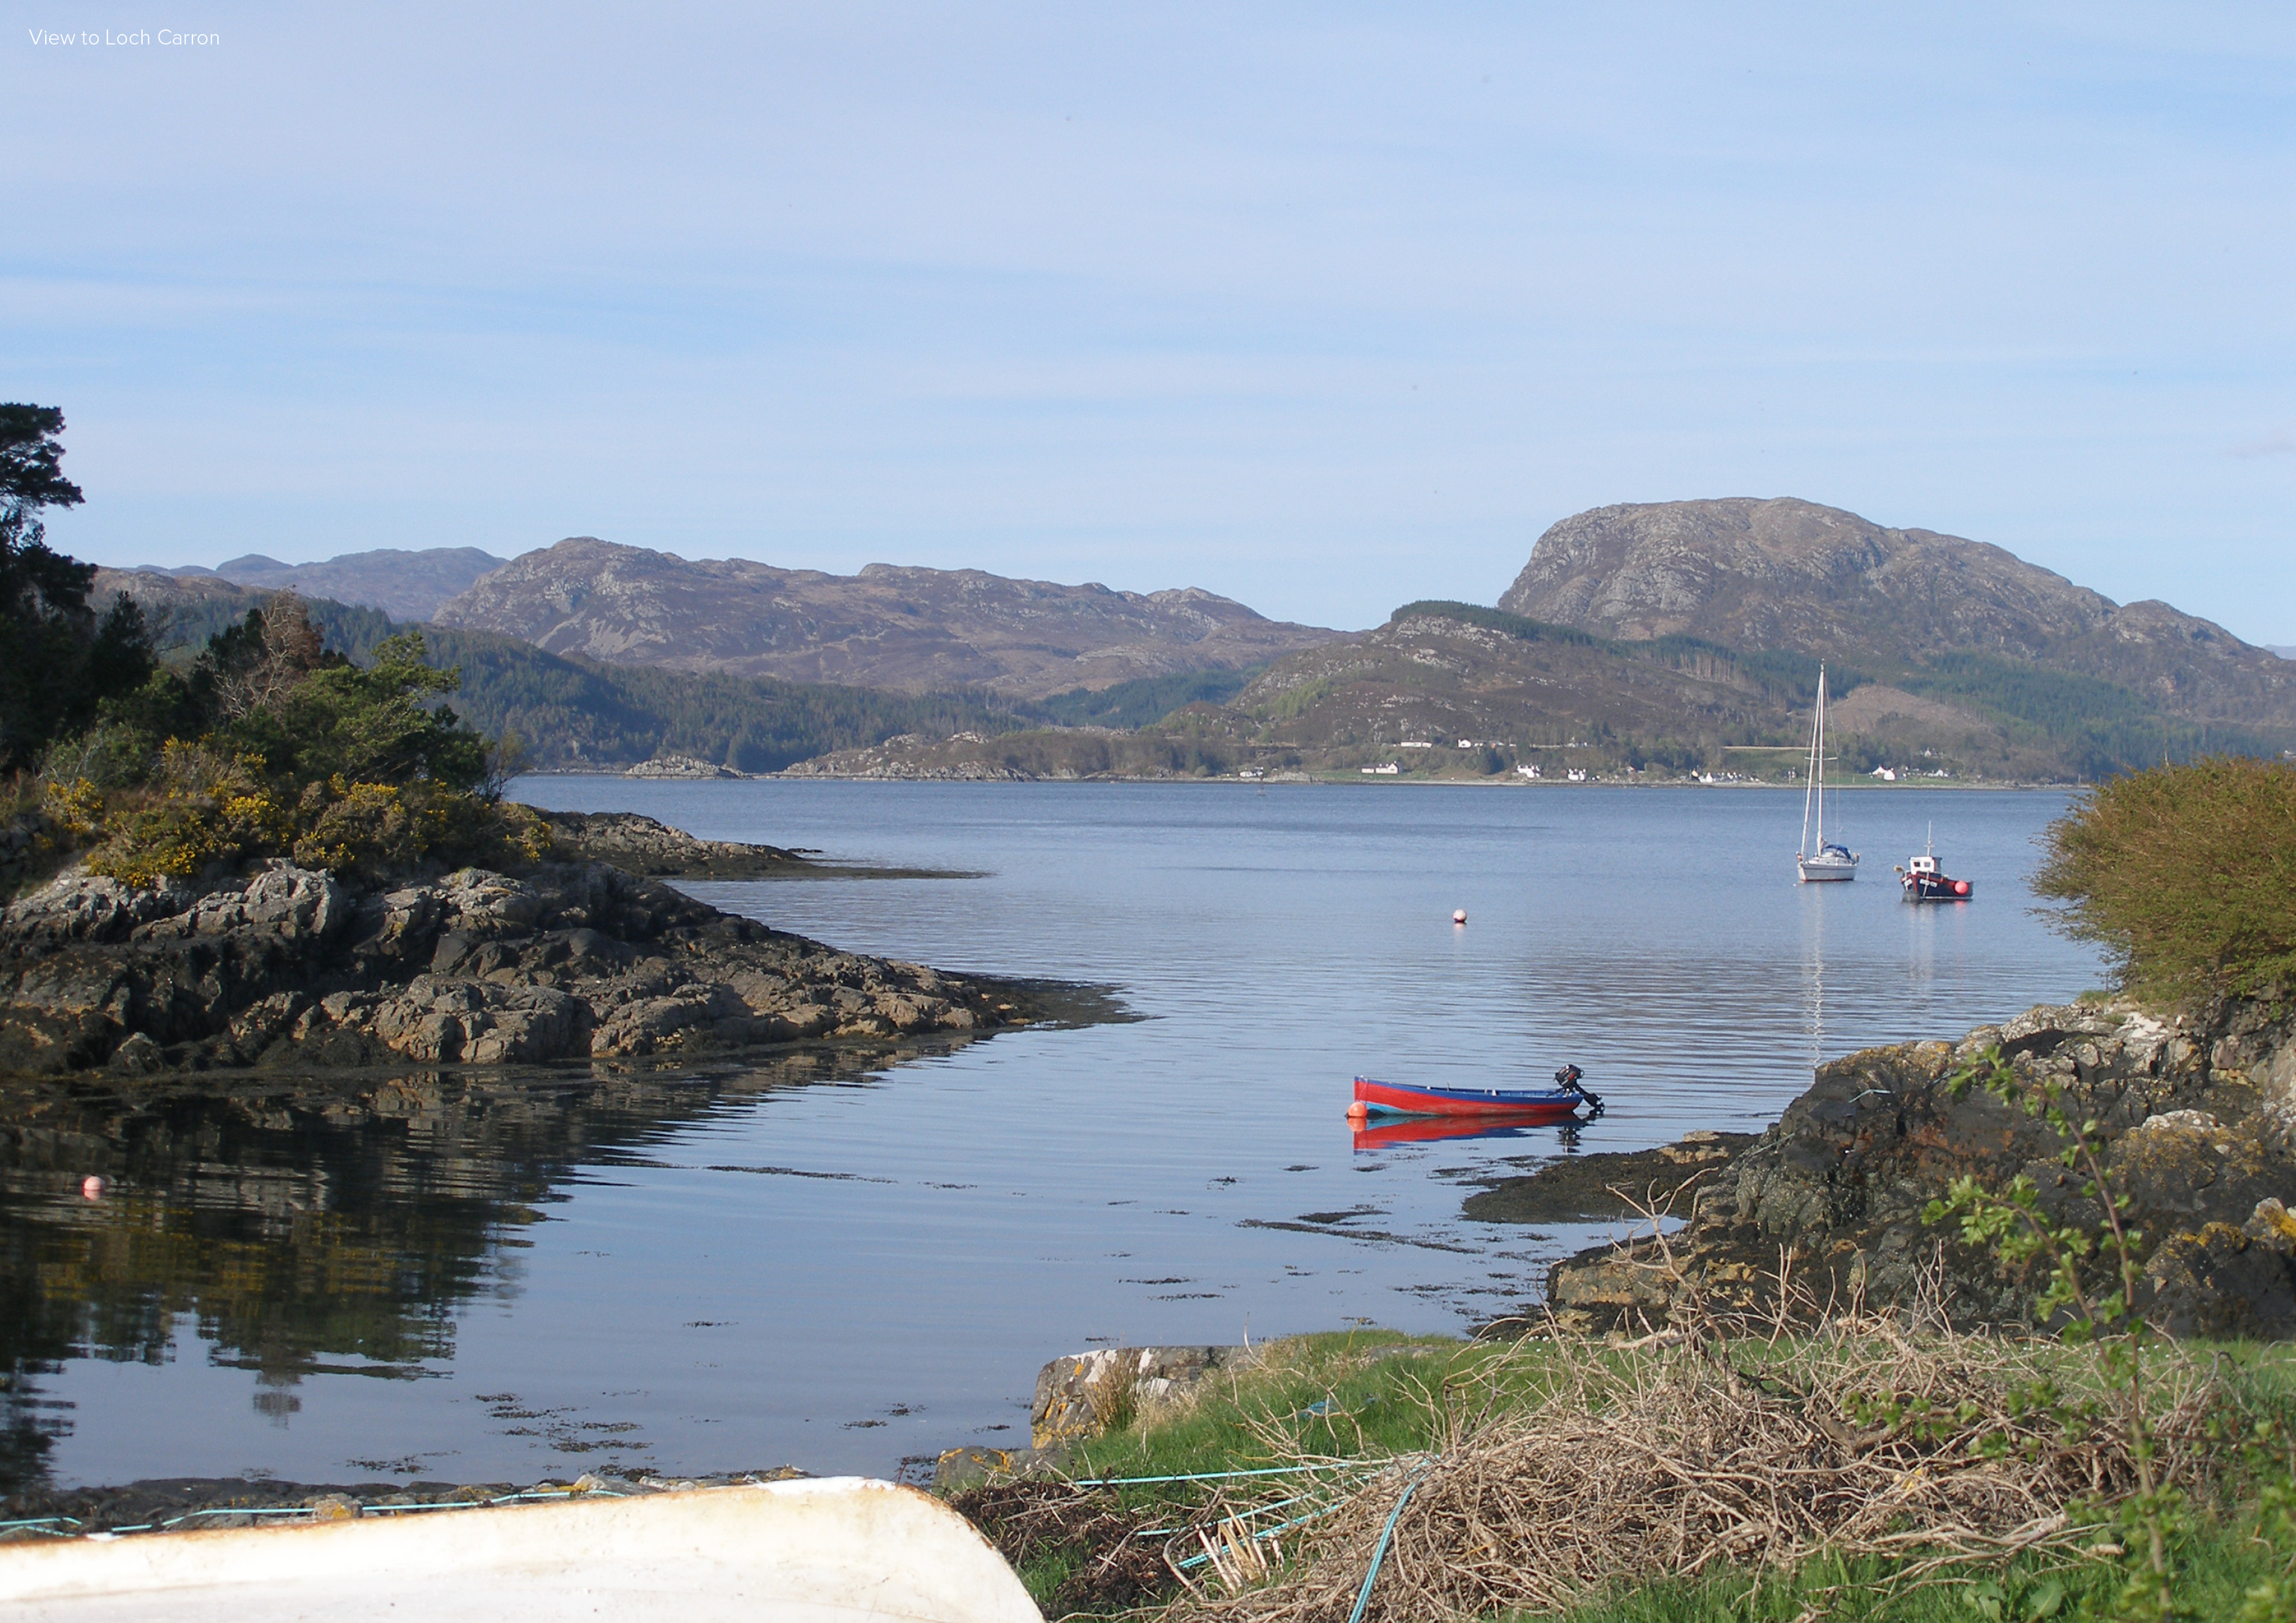 View to Loch Carron with text